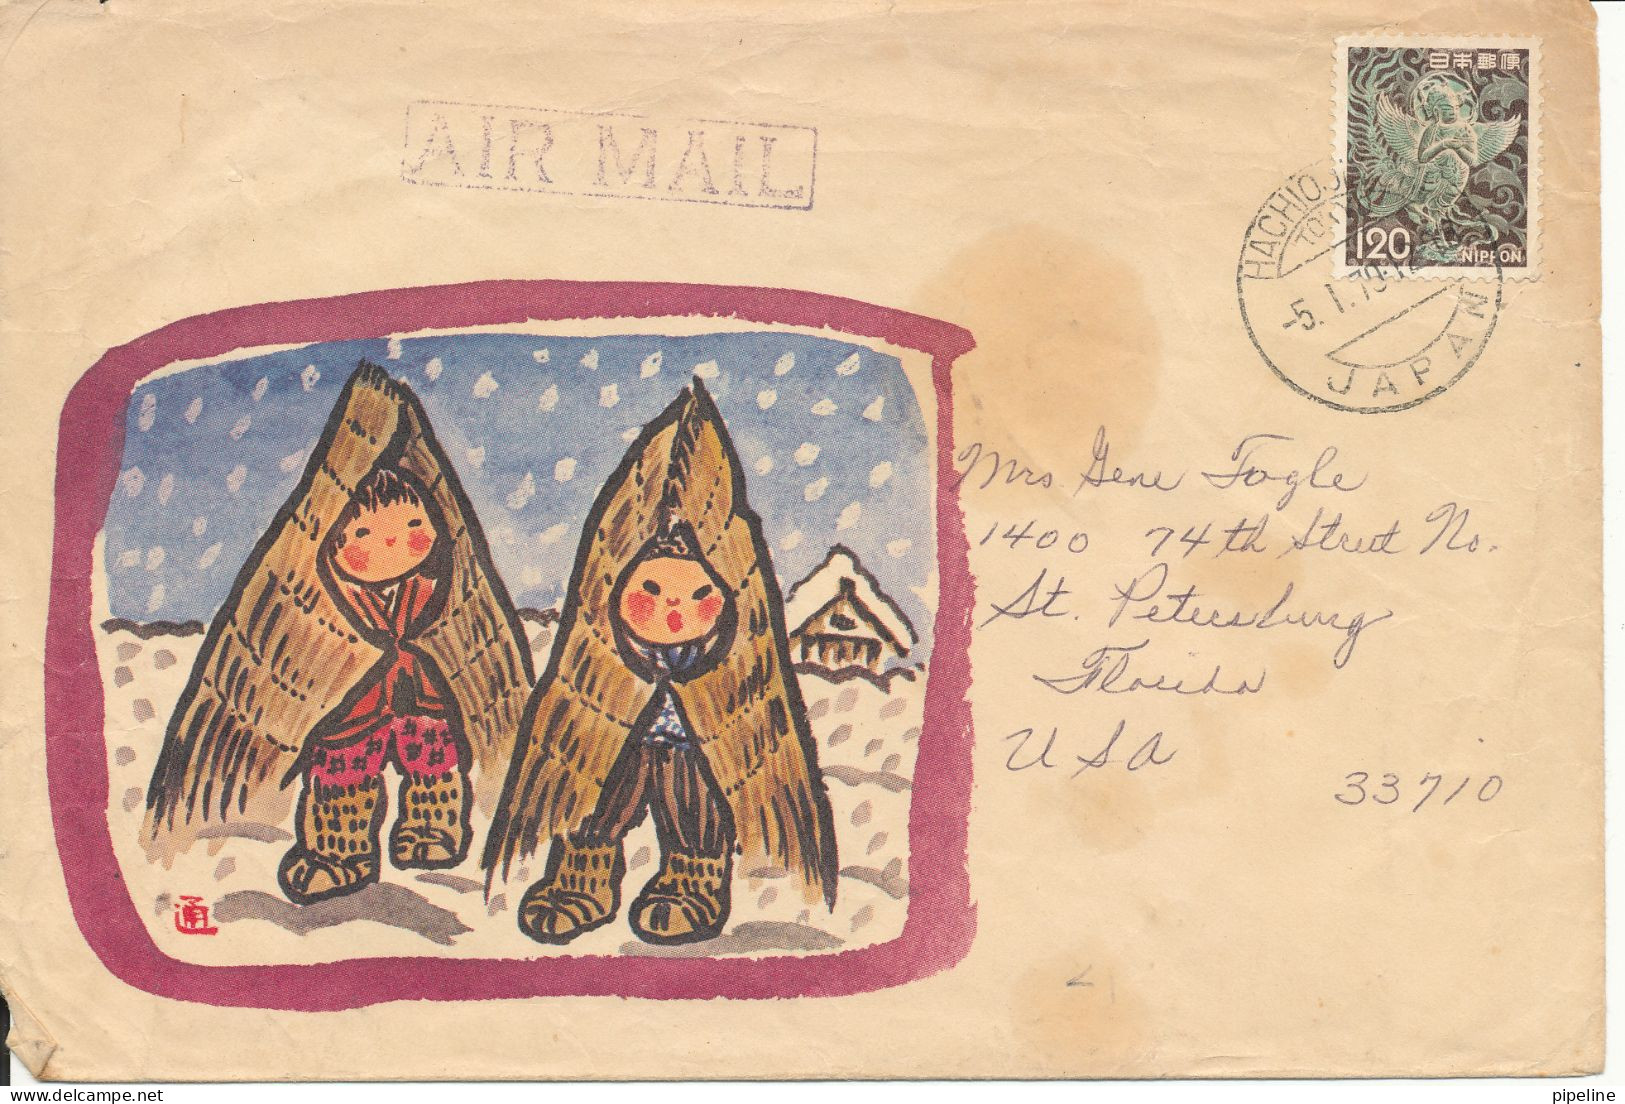 Japan Cover Sent Air Mail To USA Hachioji Shi 5-1-1979 Single Franked (brown Stains On The Cover) - Brieven En Documenten